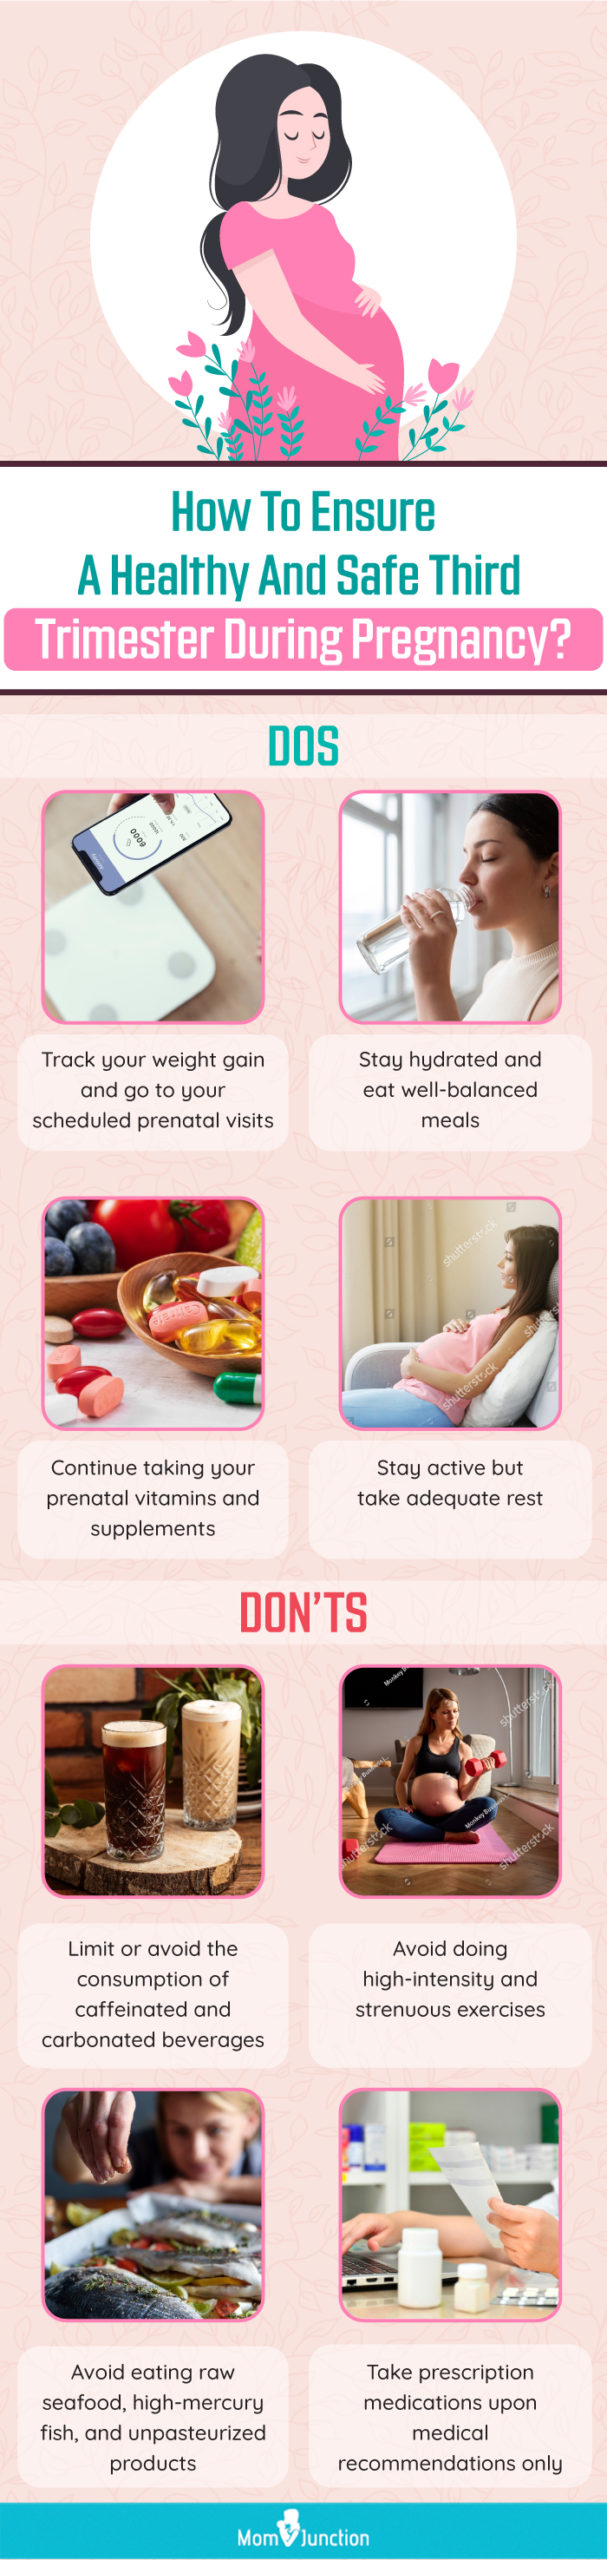 https://www.momjunction.com/wp-content/uploads/2021/09/How-To-Ensure-A-Healthy-And-Safe-Third-Trimester-During-Pregnancy-scaled.jpg